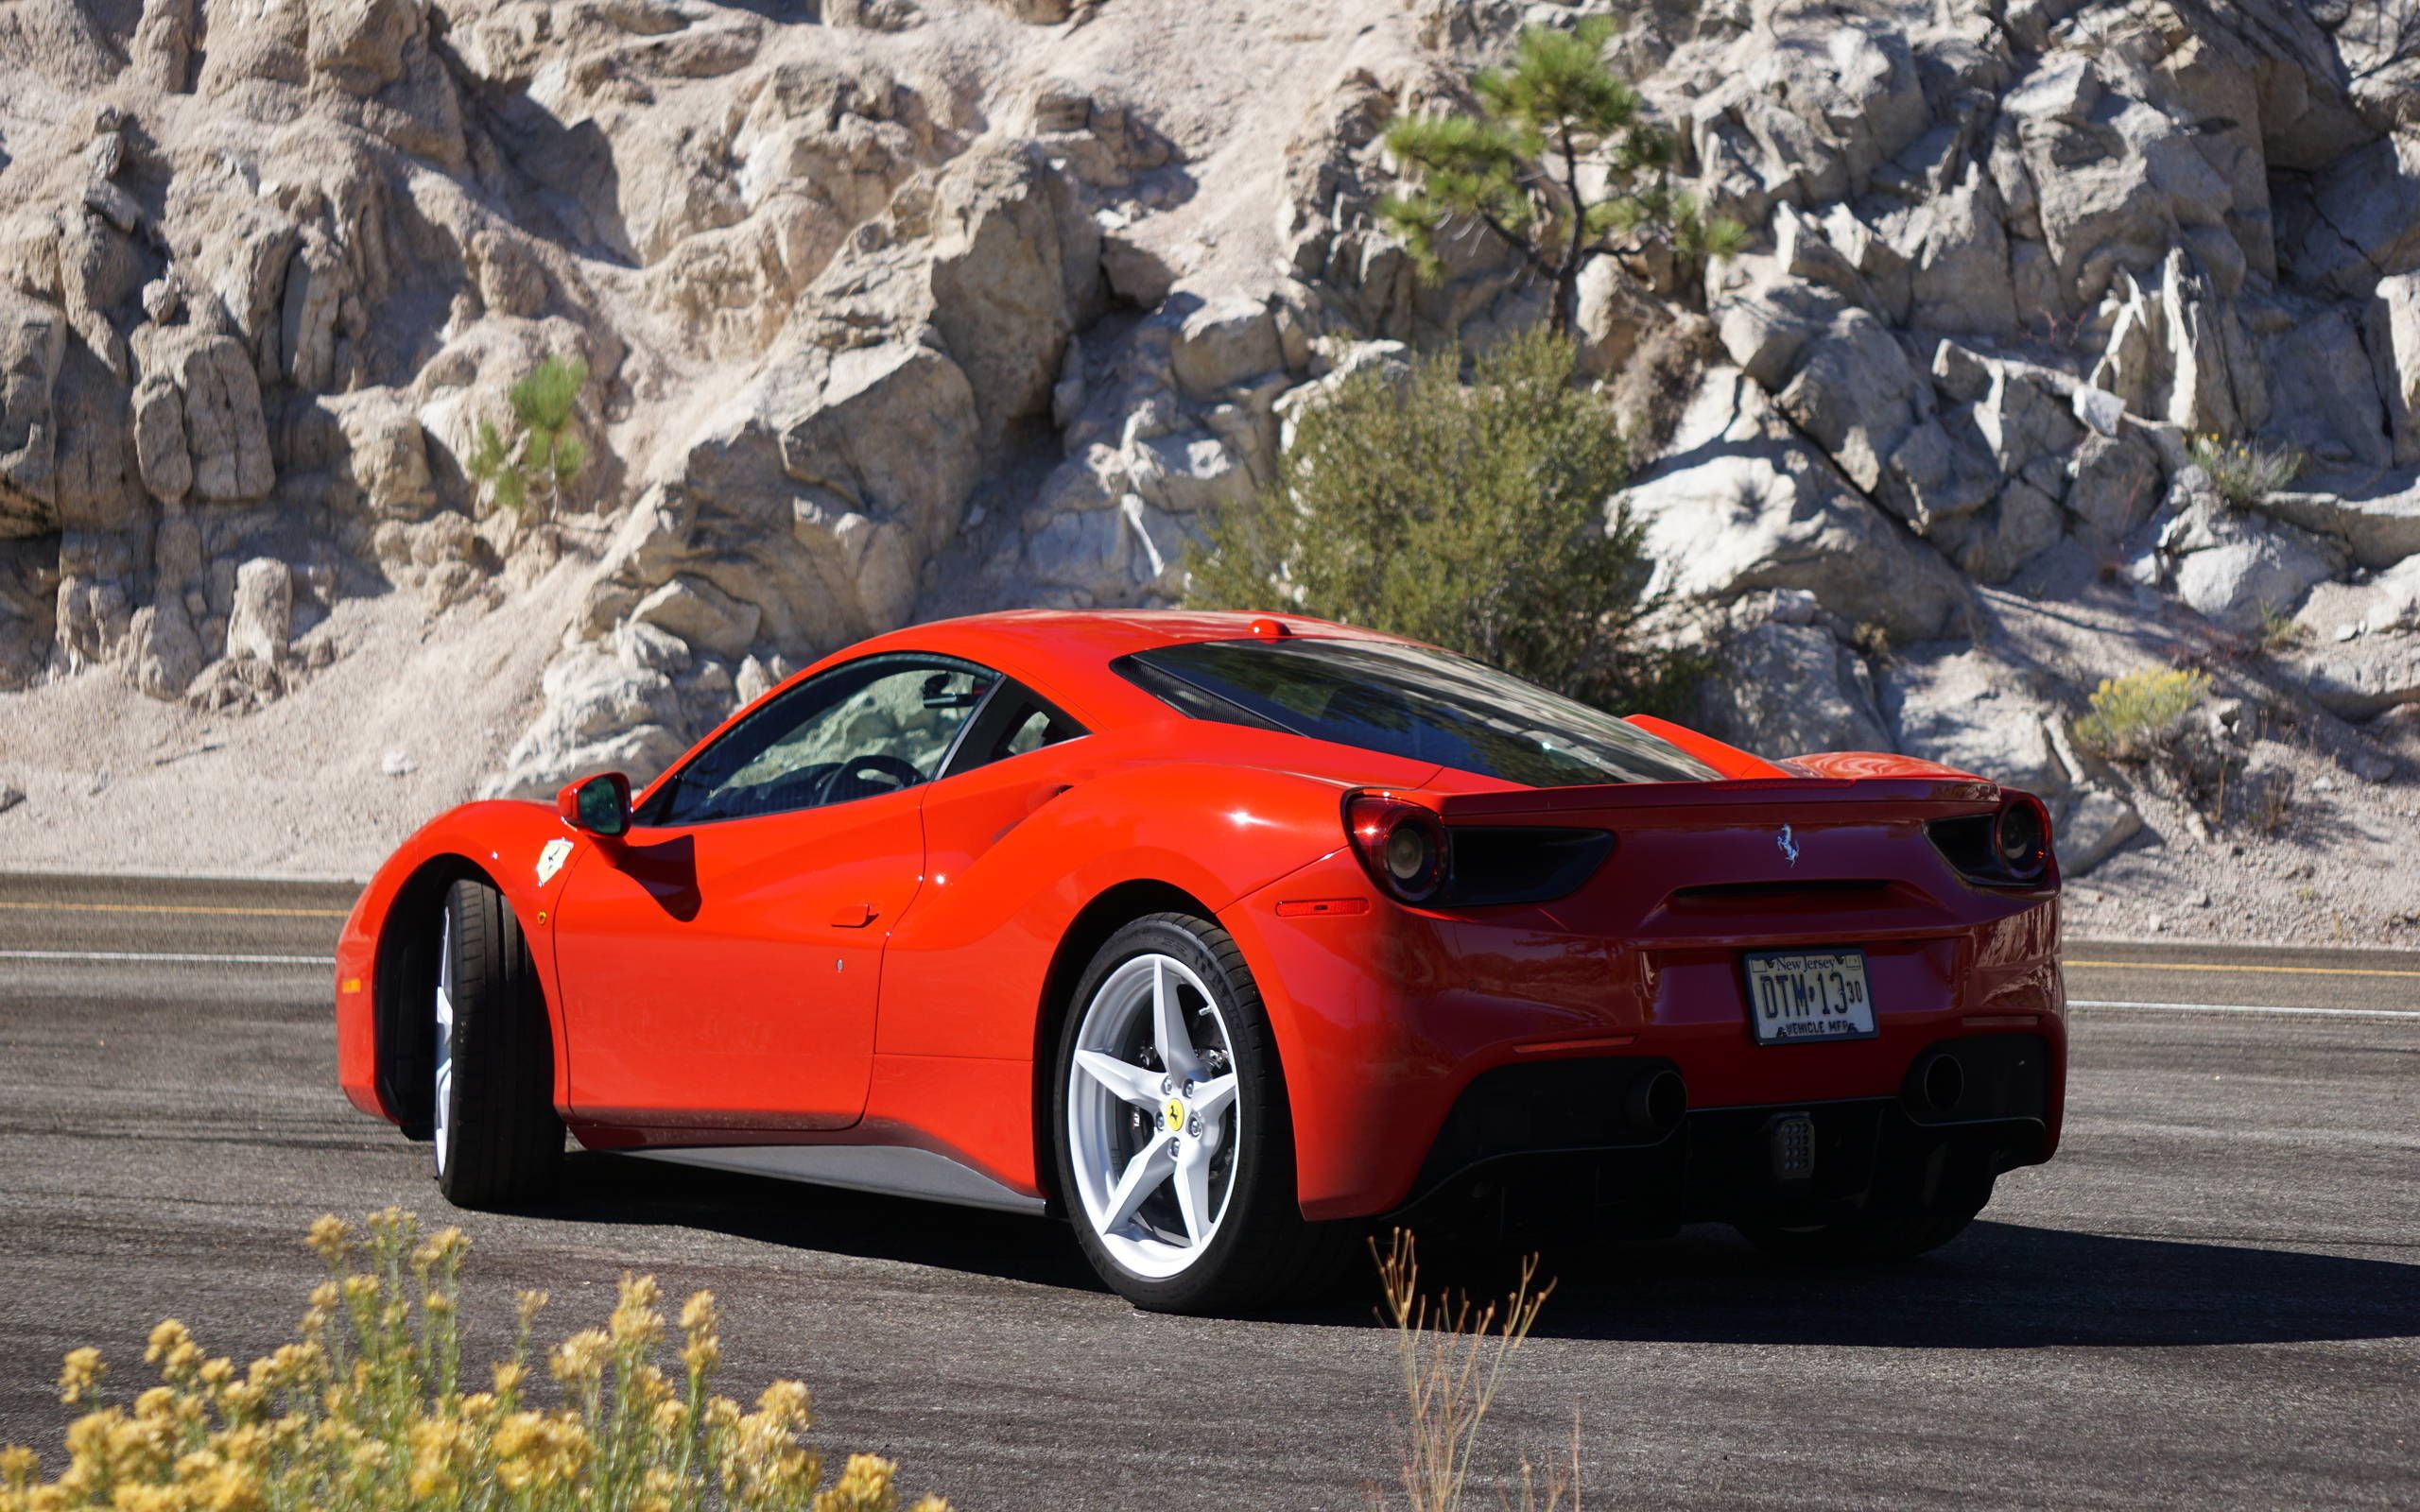 Ferrari 488GTB review: Here's what 'world class' actually means